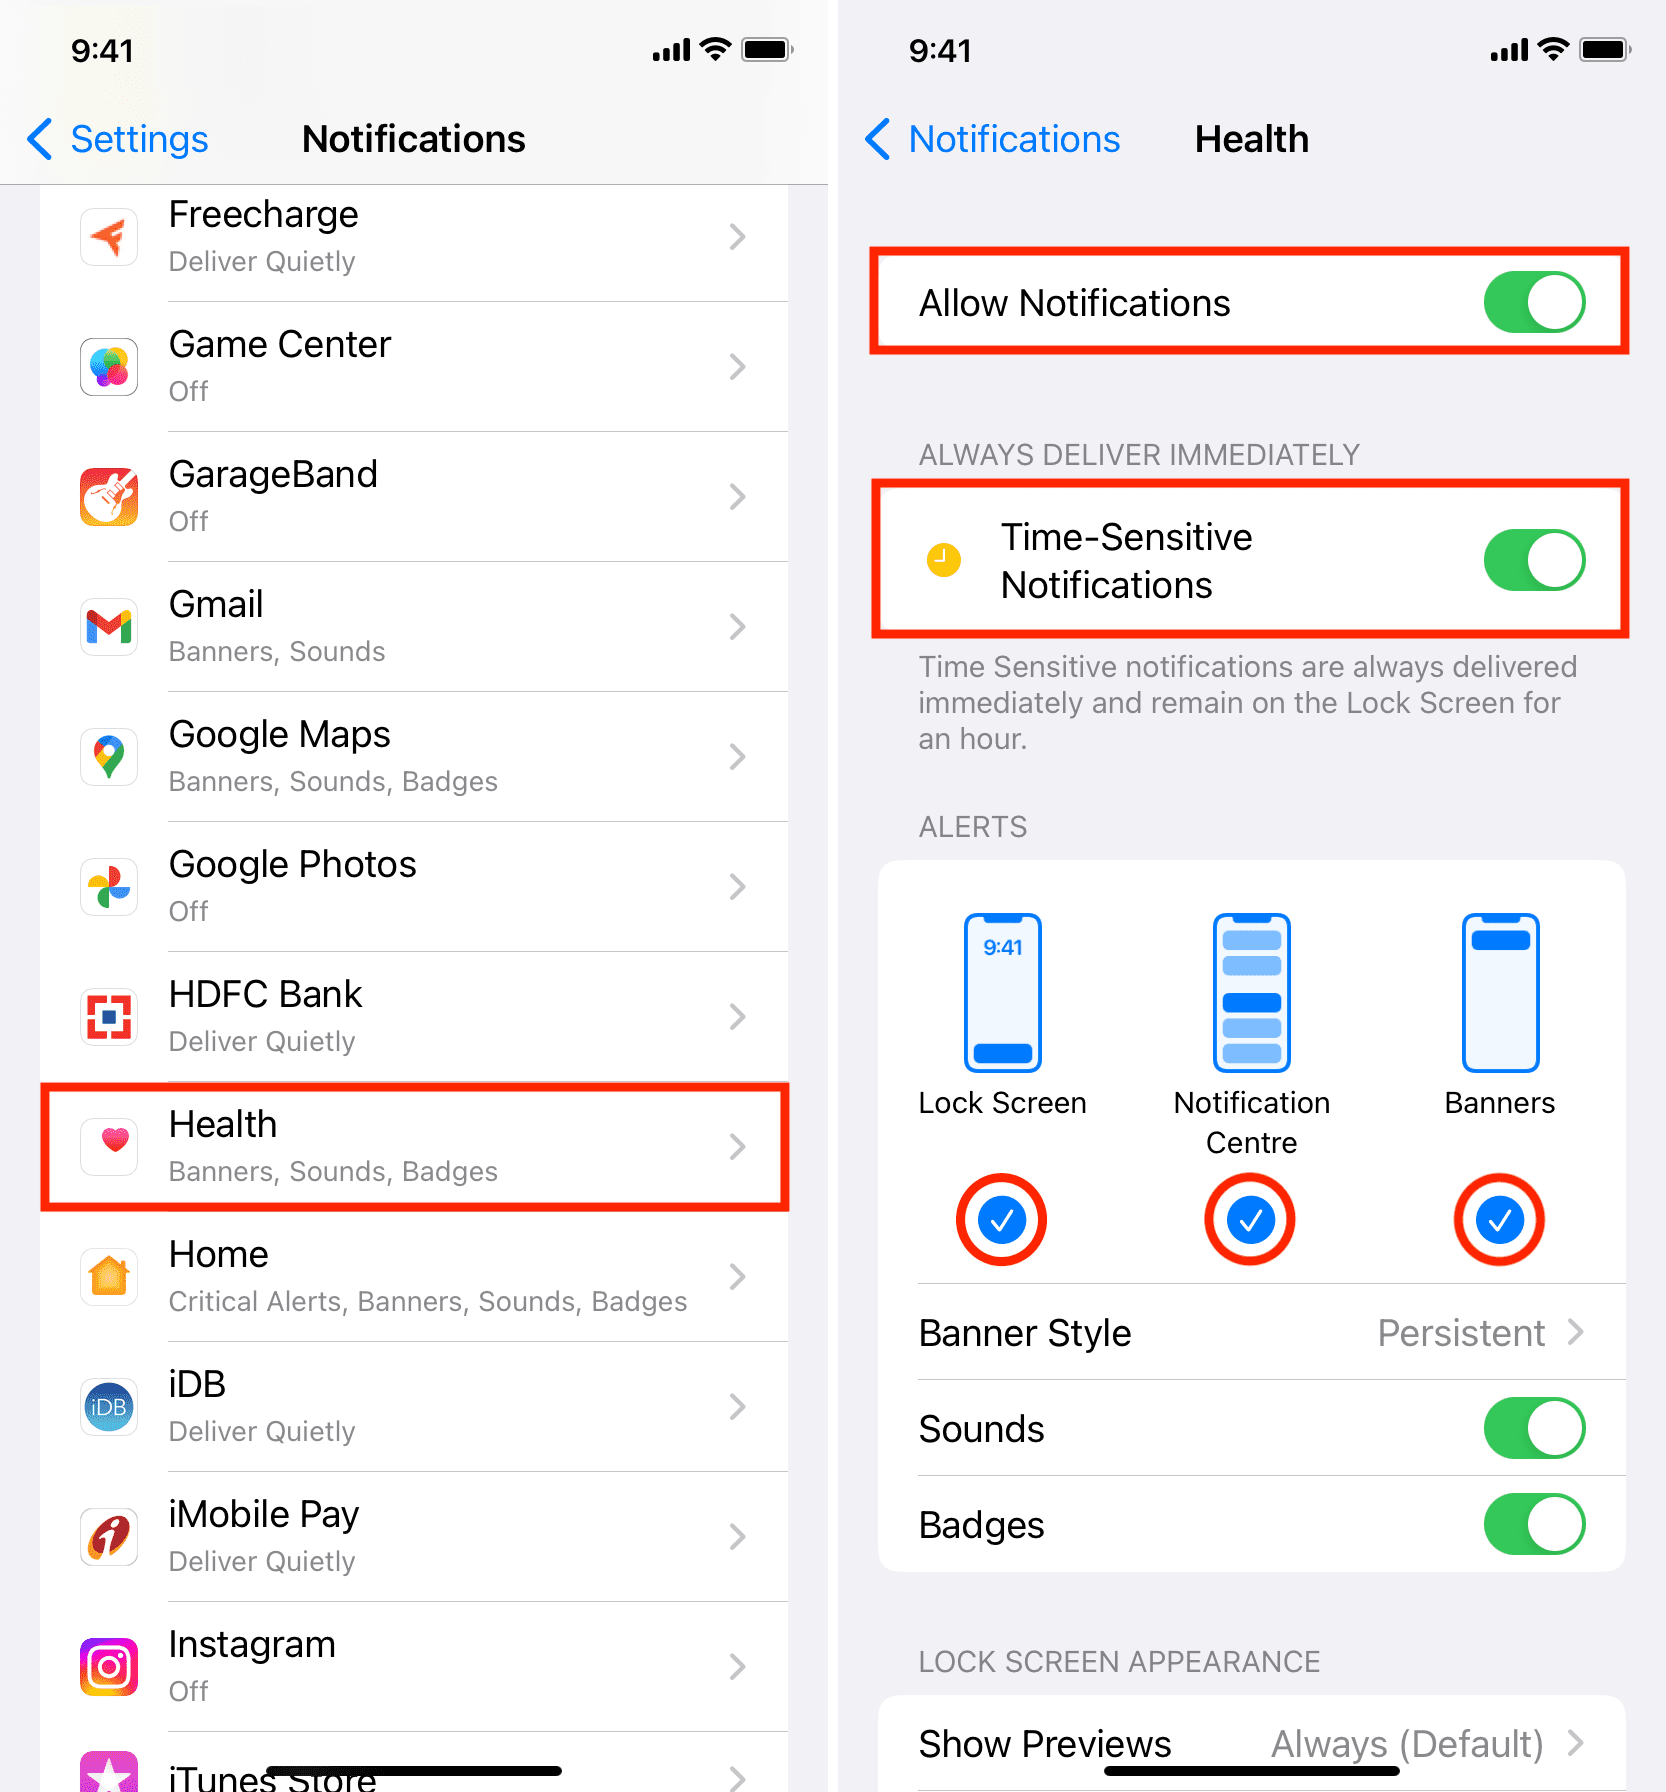 Switch on notifications for the Health app from iPhone Settings